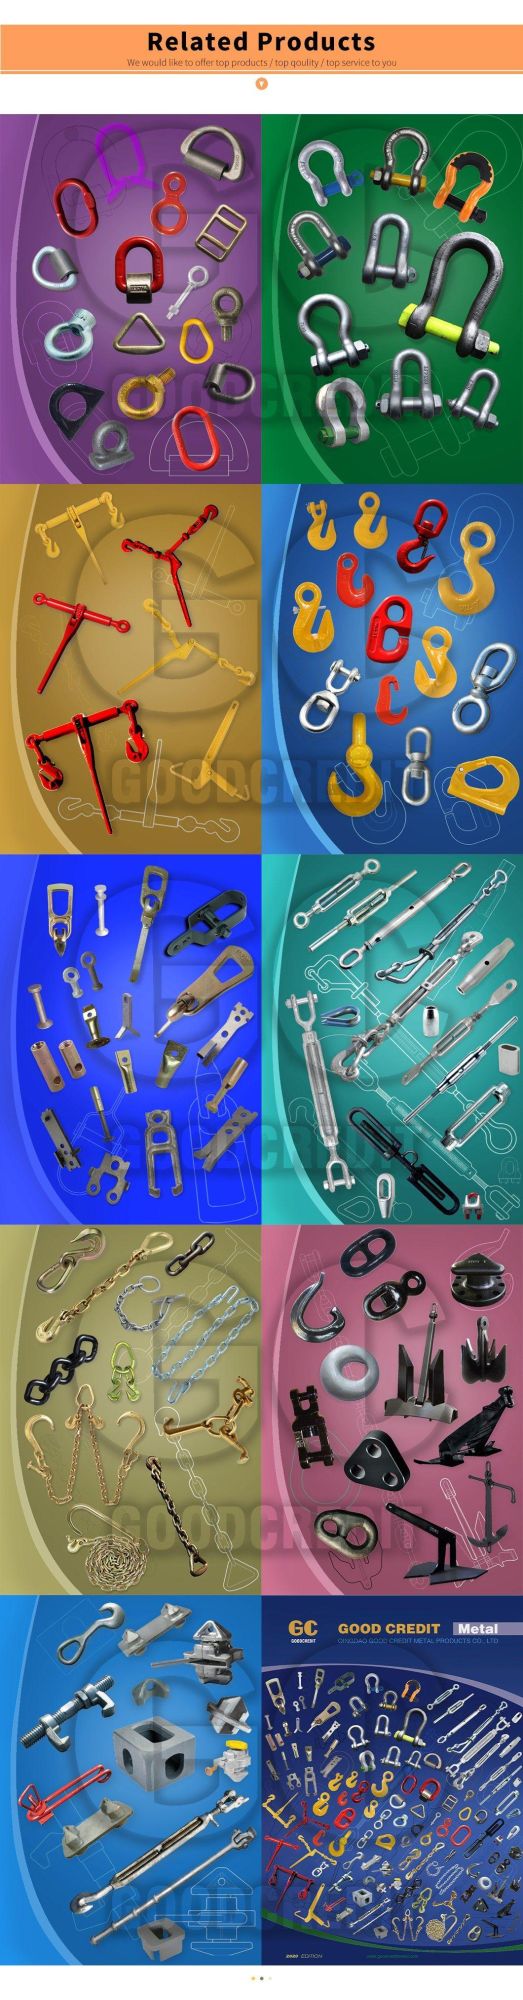 Lifting Accessories Rigging Hardware Forged Alloy Steel Eye Hook